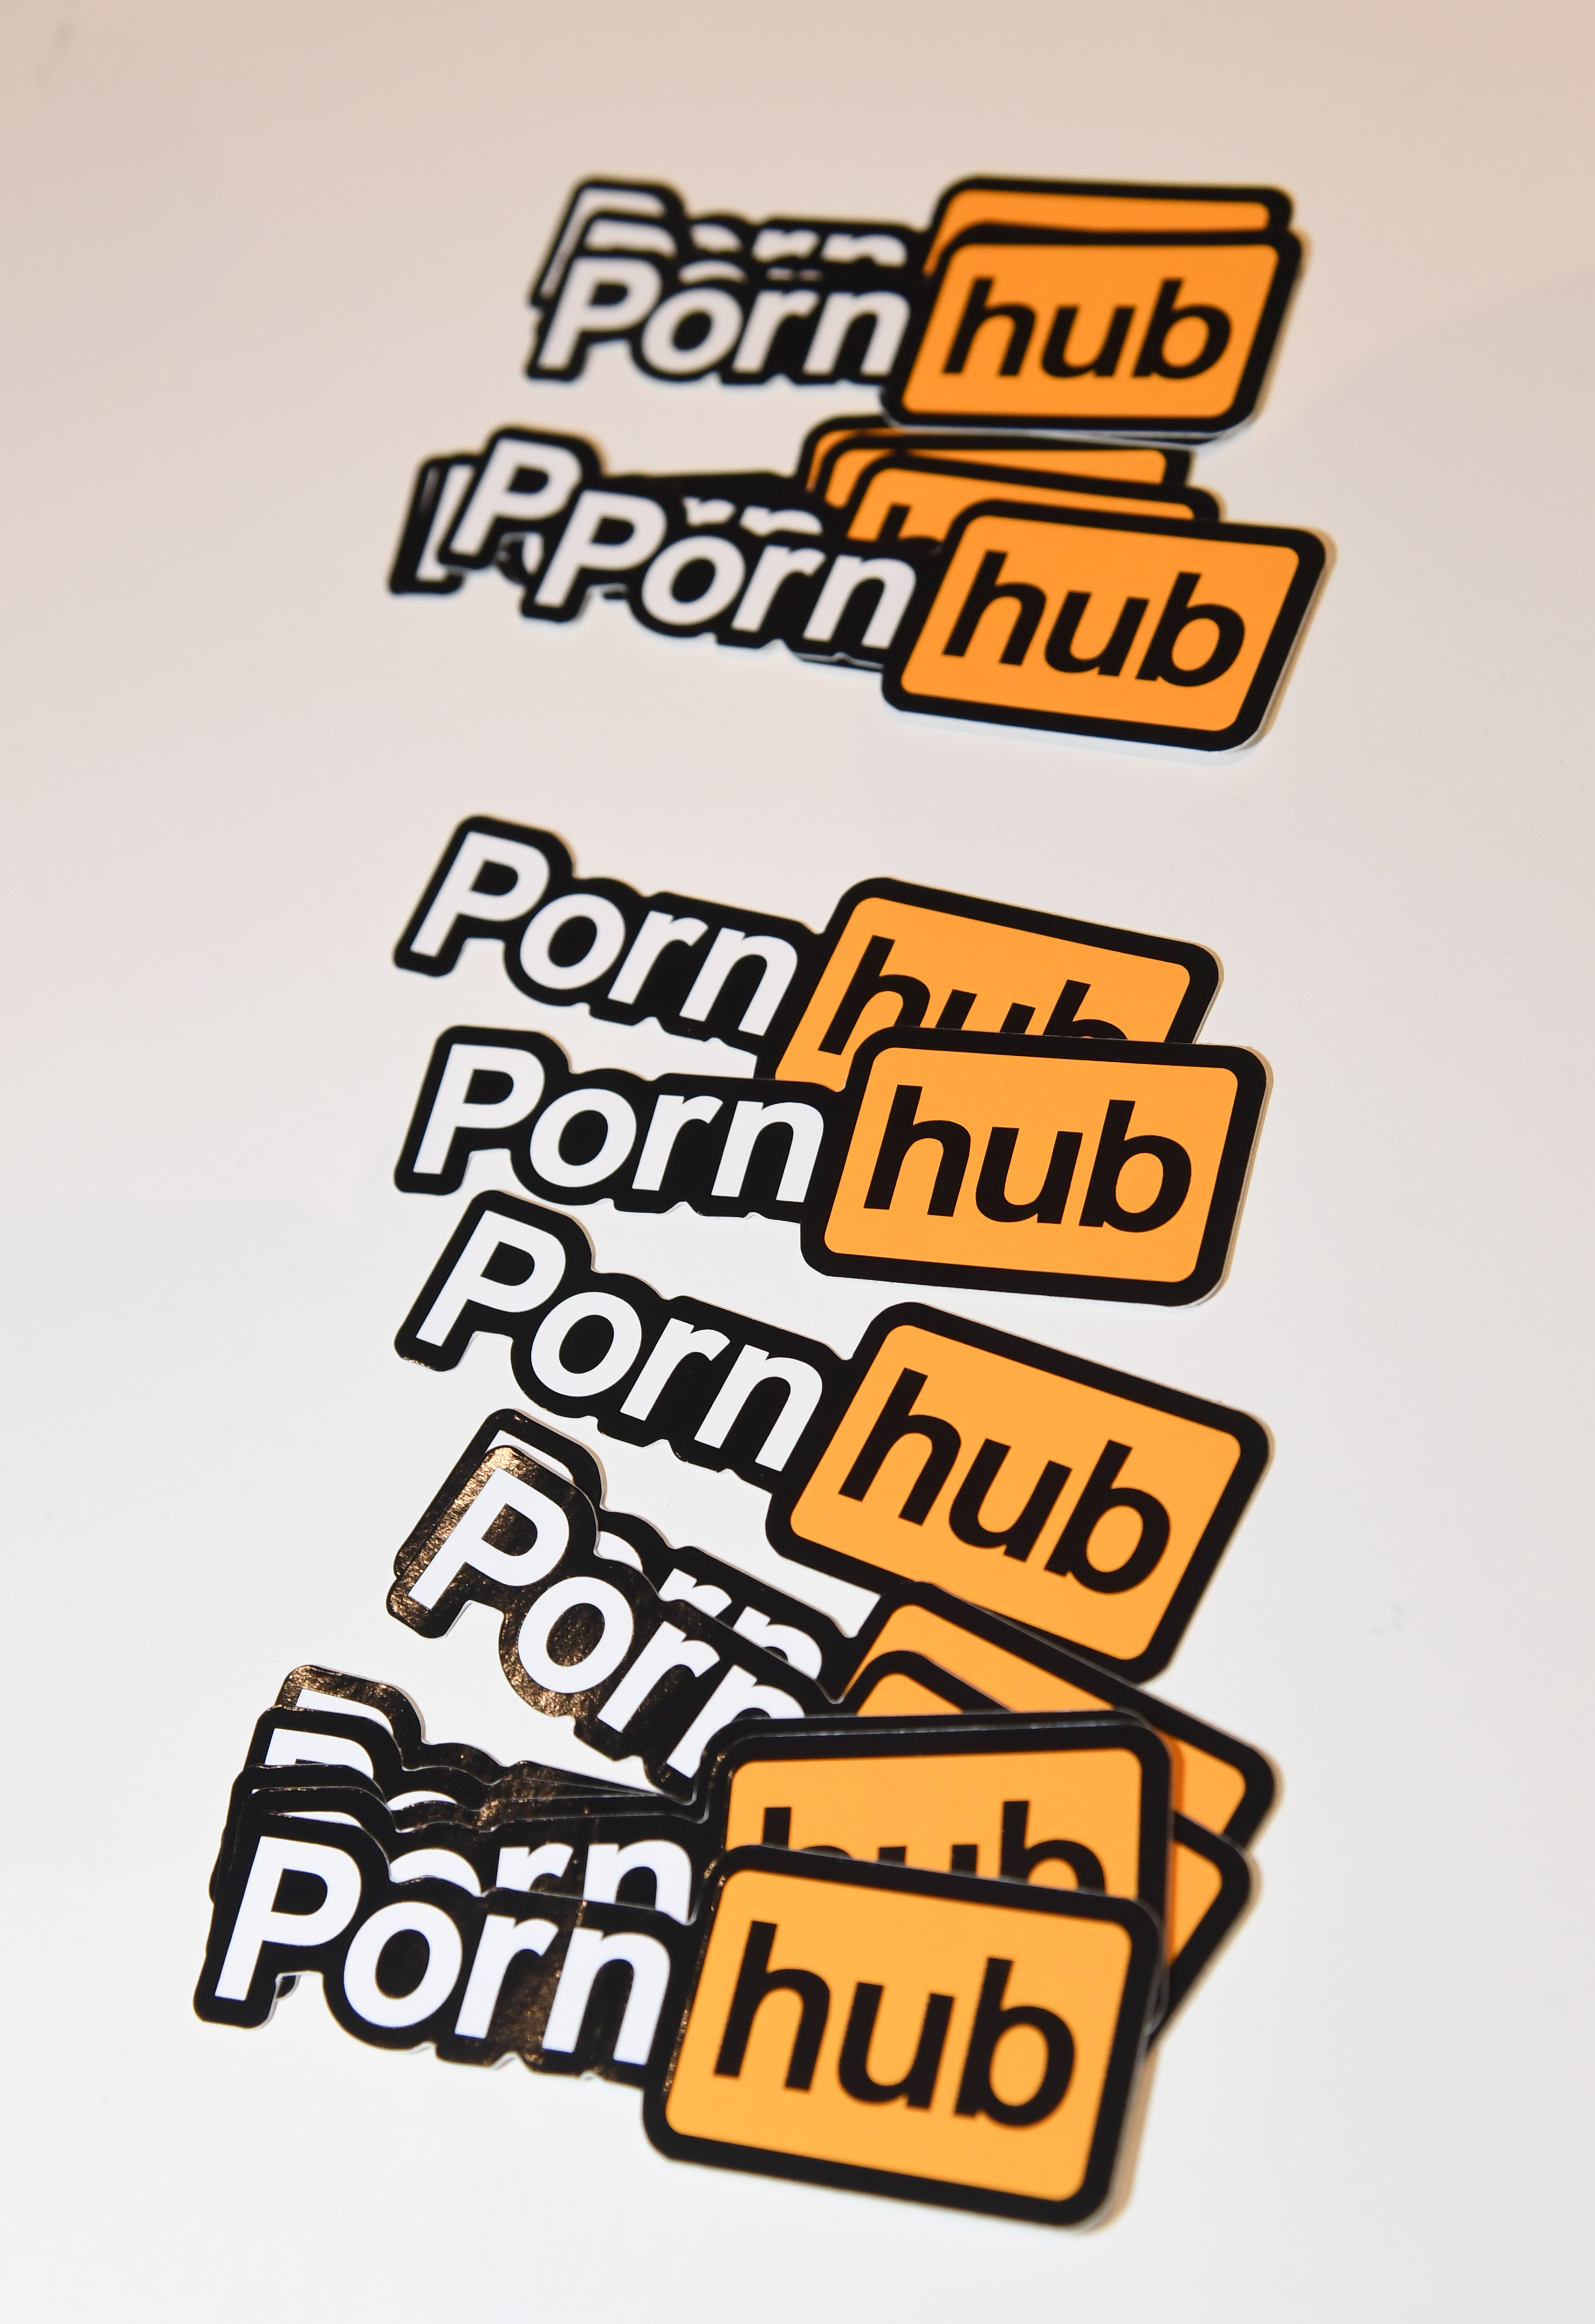 Pornhub Just Purged All Unverified Content From the Platform photo image